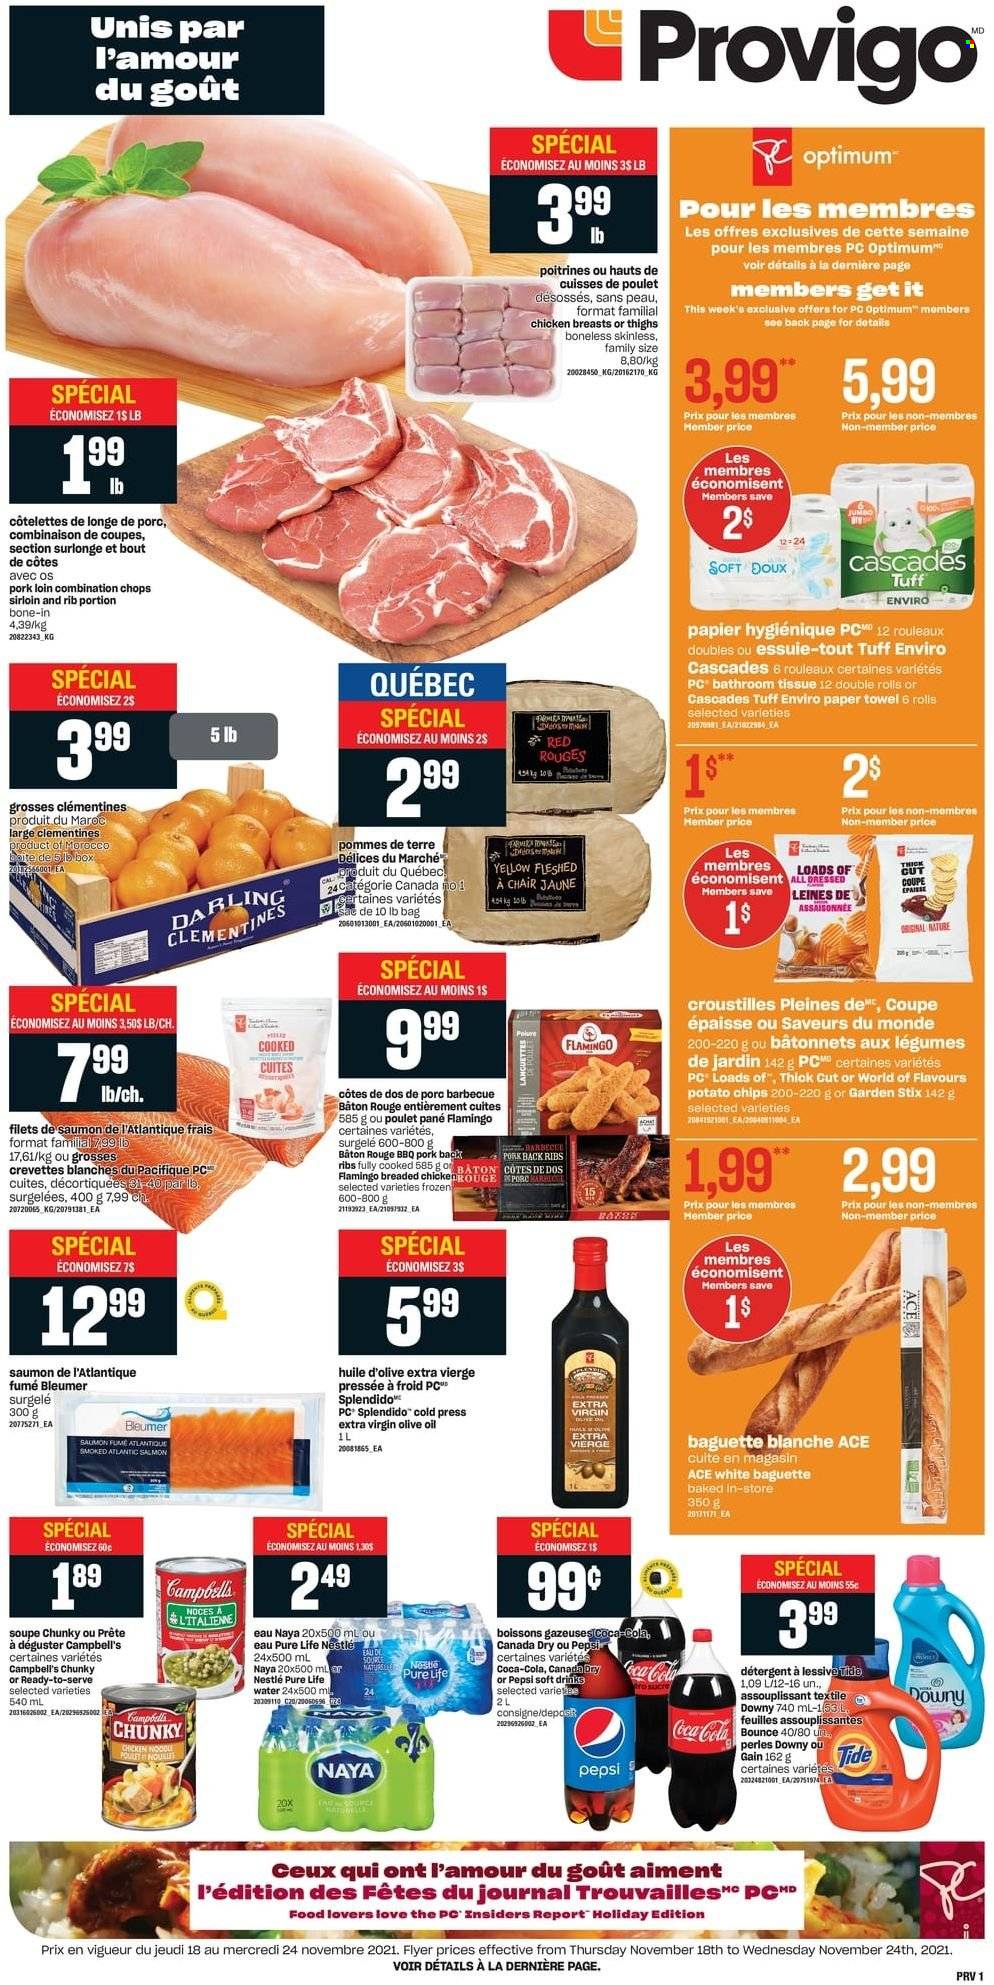 thumbnail - Provigo Flyer - November 18, 2021 - November 24, 2021 - Sales products - clementines, salmon, Campbell's, potato chips, extra virgin olive oil, olive oil, oil, Canada Dry, Coca-Cola, Pepsi, soft drink, Pure Life Water, pork loin, pork meat, pork ribs, pork back ribs, bath tissue, paper towels, Gain, Tide, Bounce, Nestlé, baguette, detergent. Page 1.